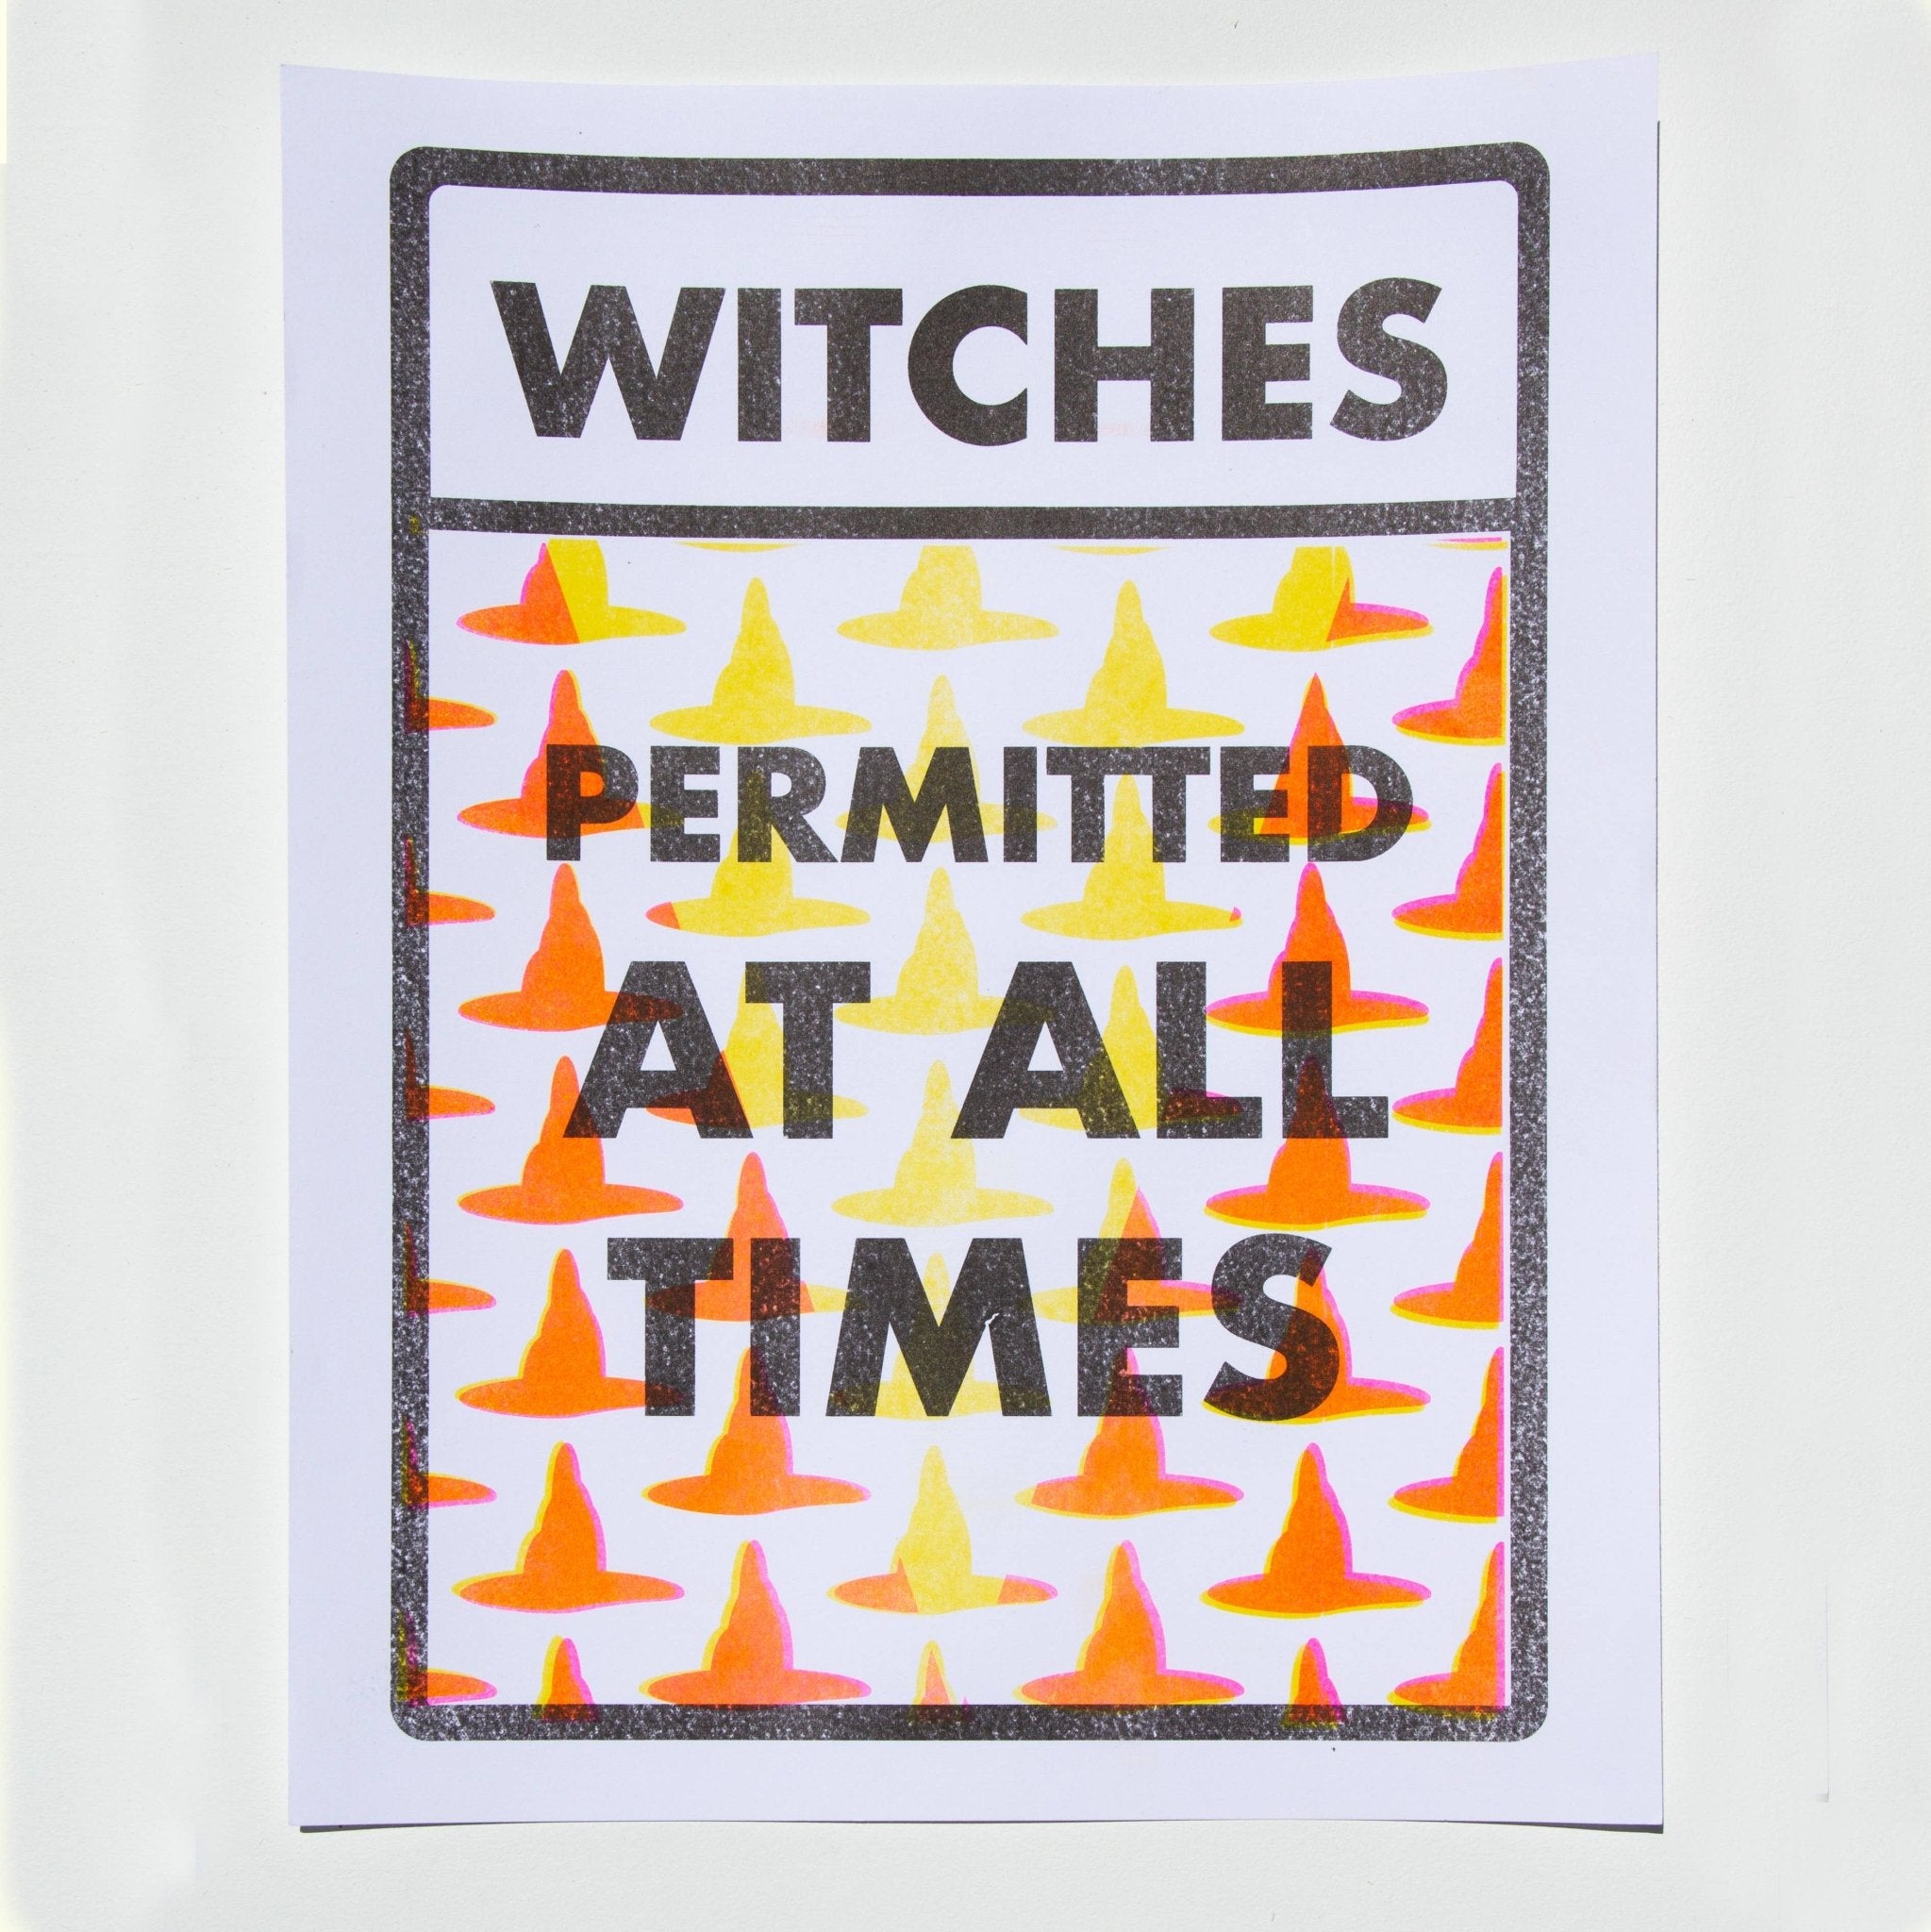 Witches Permitted At All Times - Spiral Circle